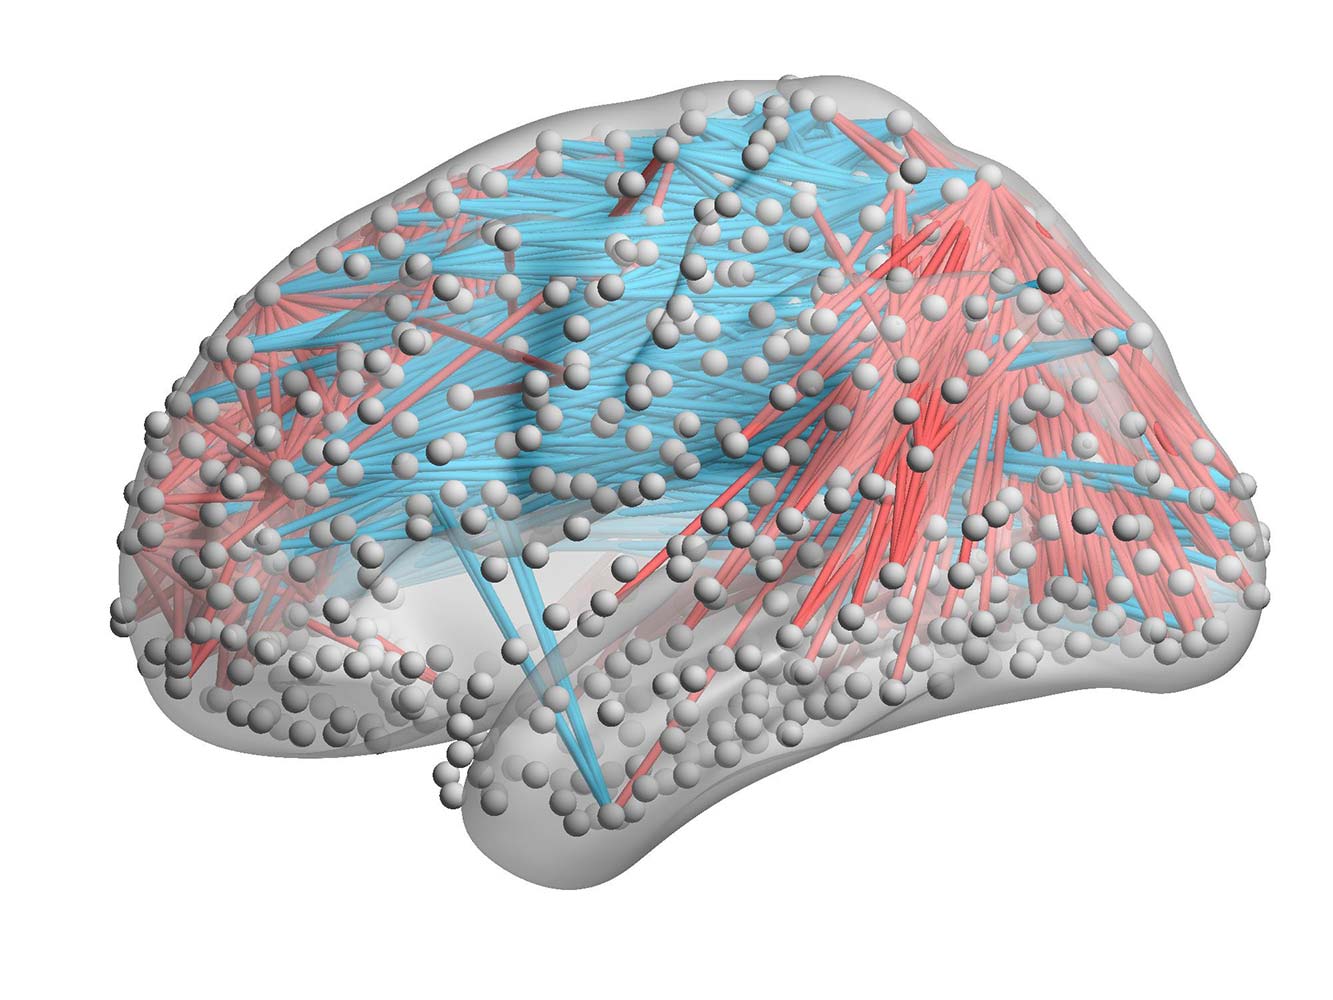 An computer image of the brain with many dots linked by coloured lines, indicating brain connectivity